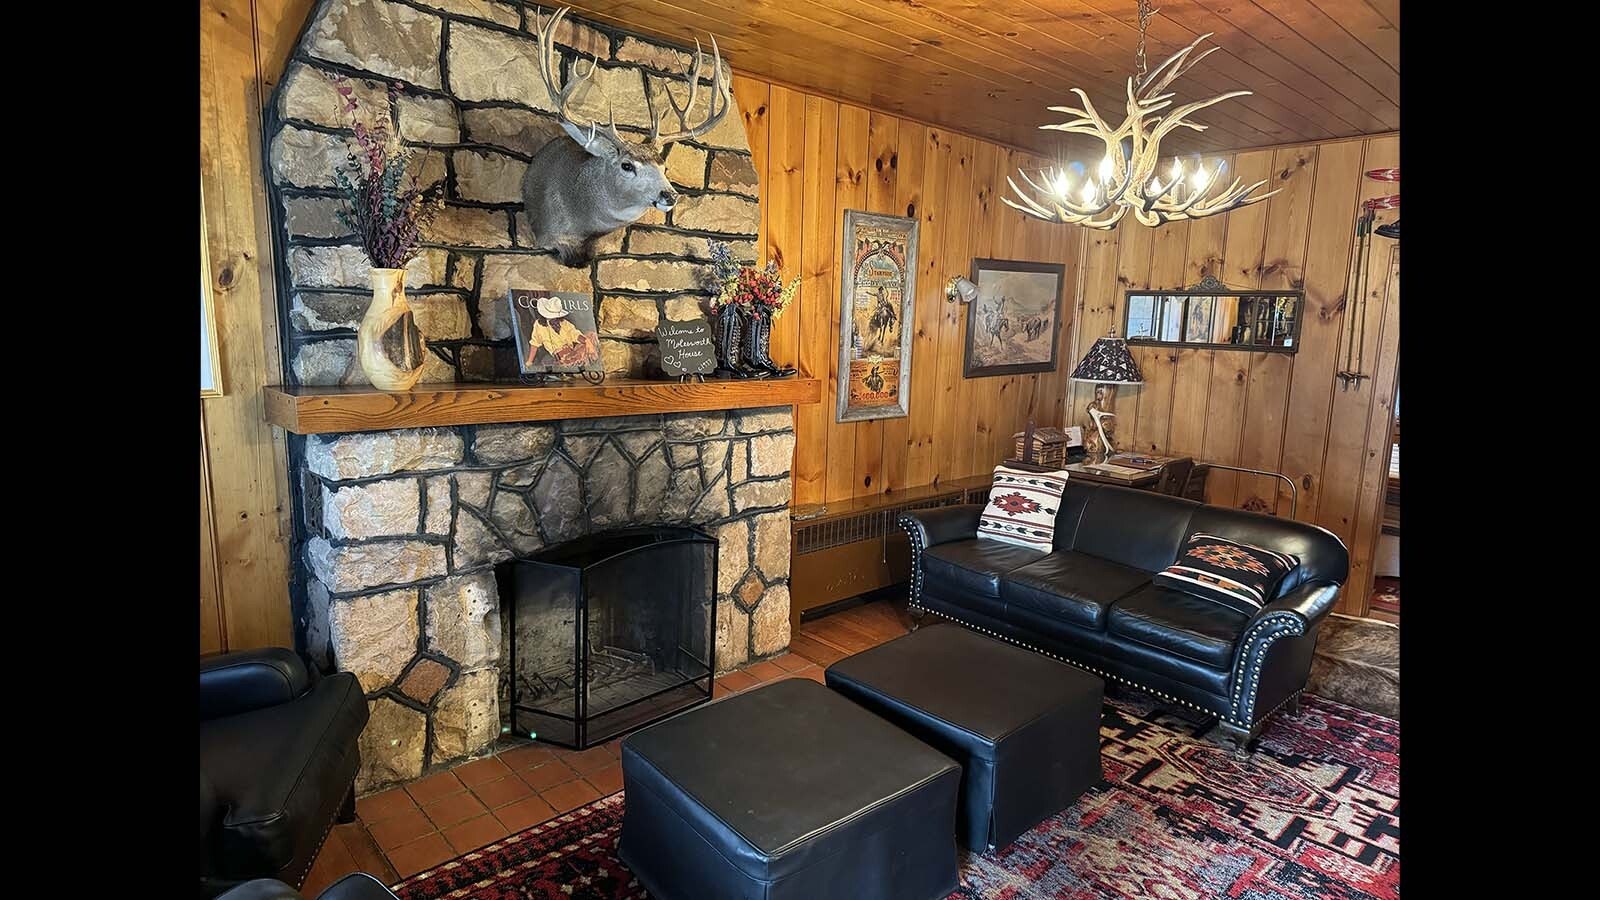 The living room of the Molesworth House oozes Wyoming and signature Western flair.